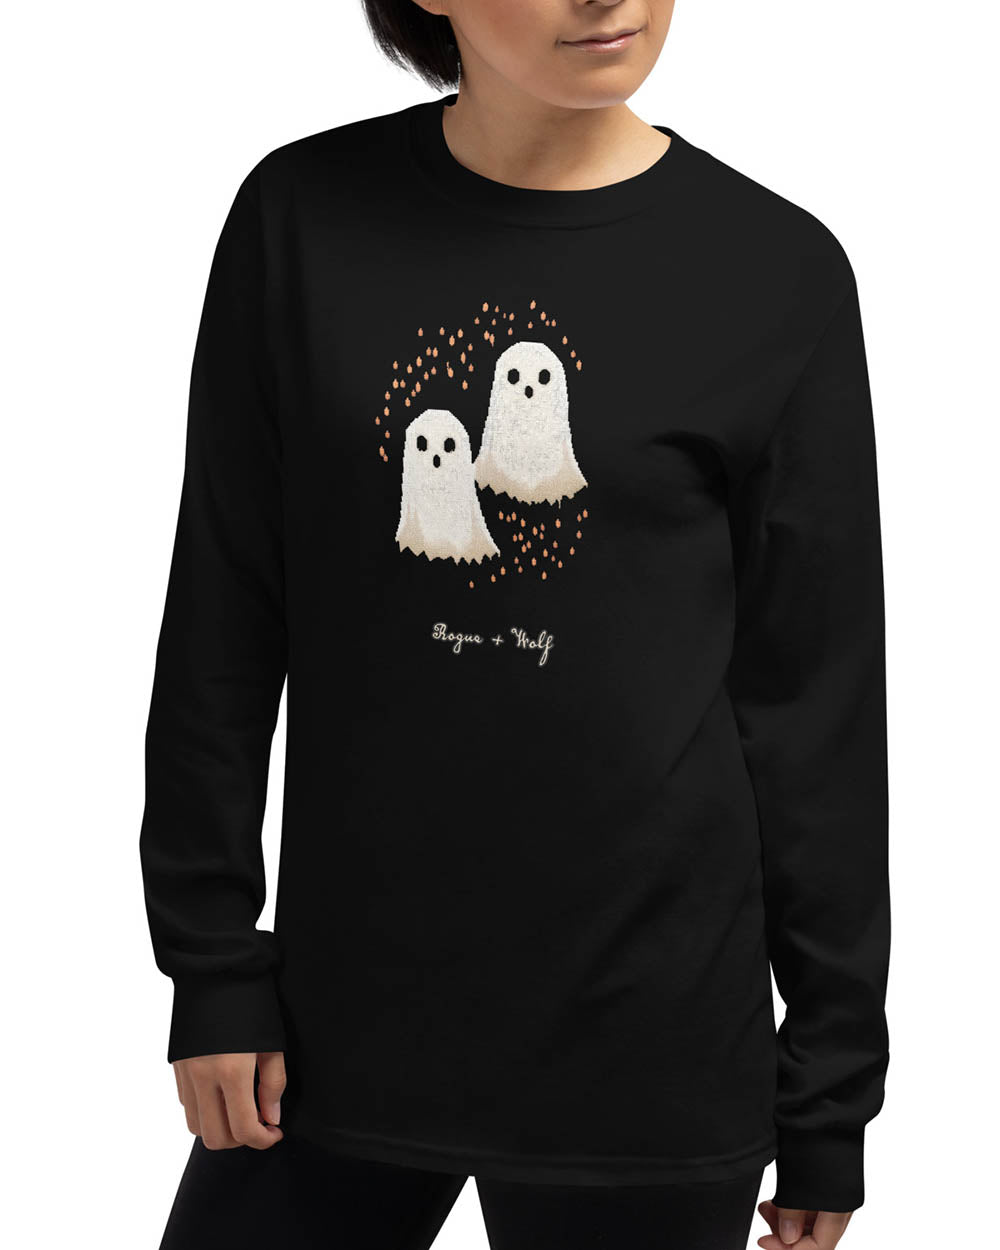 Boo Long Sleeve Tee - Dark Academia Spooky Ghosts Top, Witchy Occult Unisex Vegan Fashion, Christmas Gothic Gifts